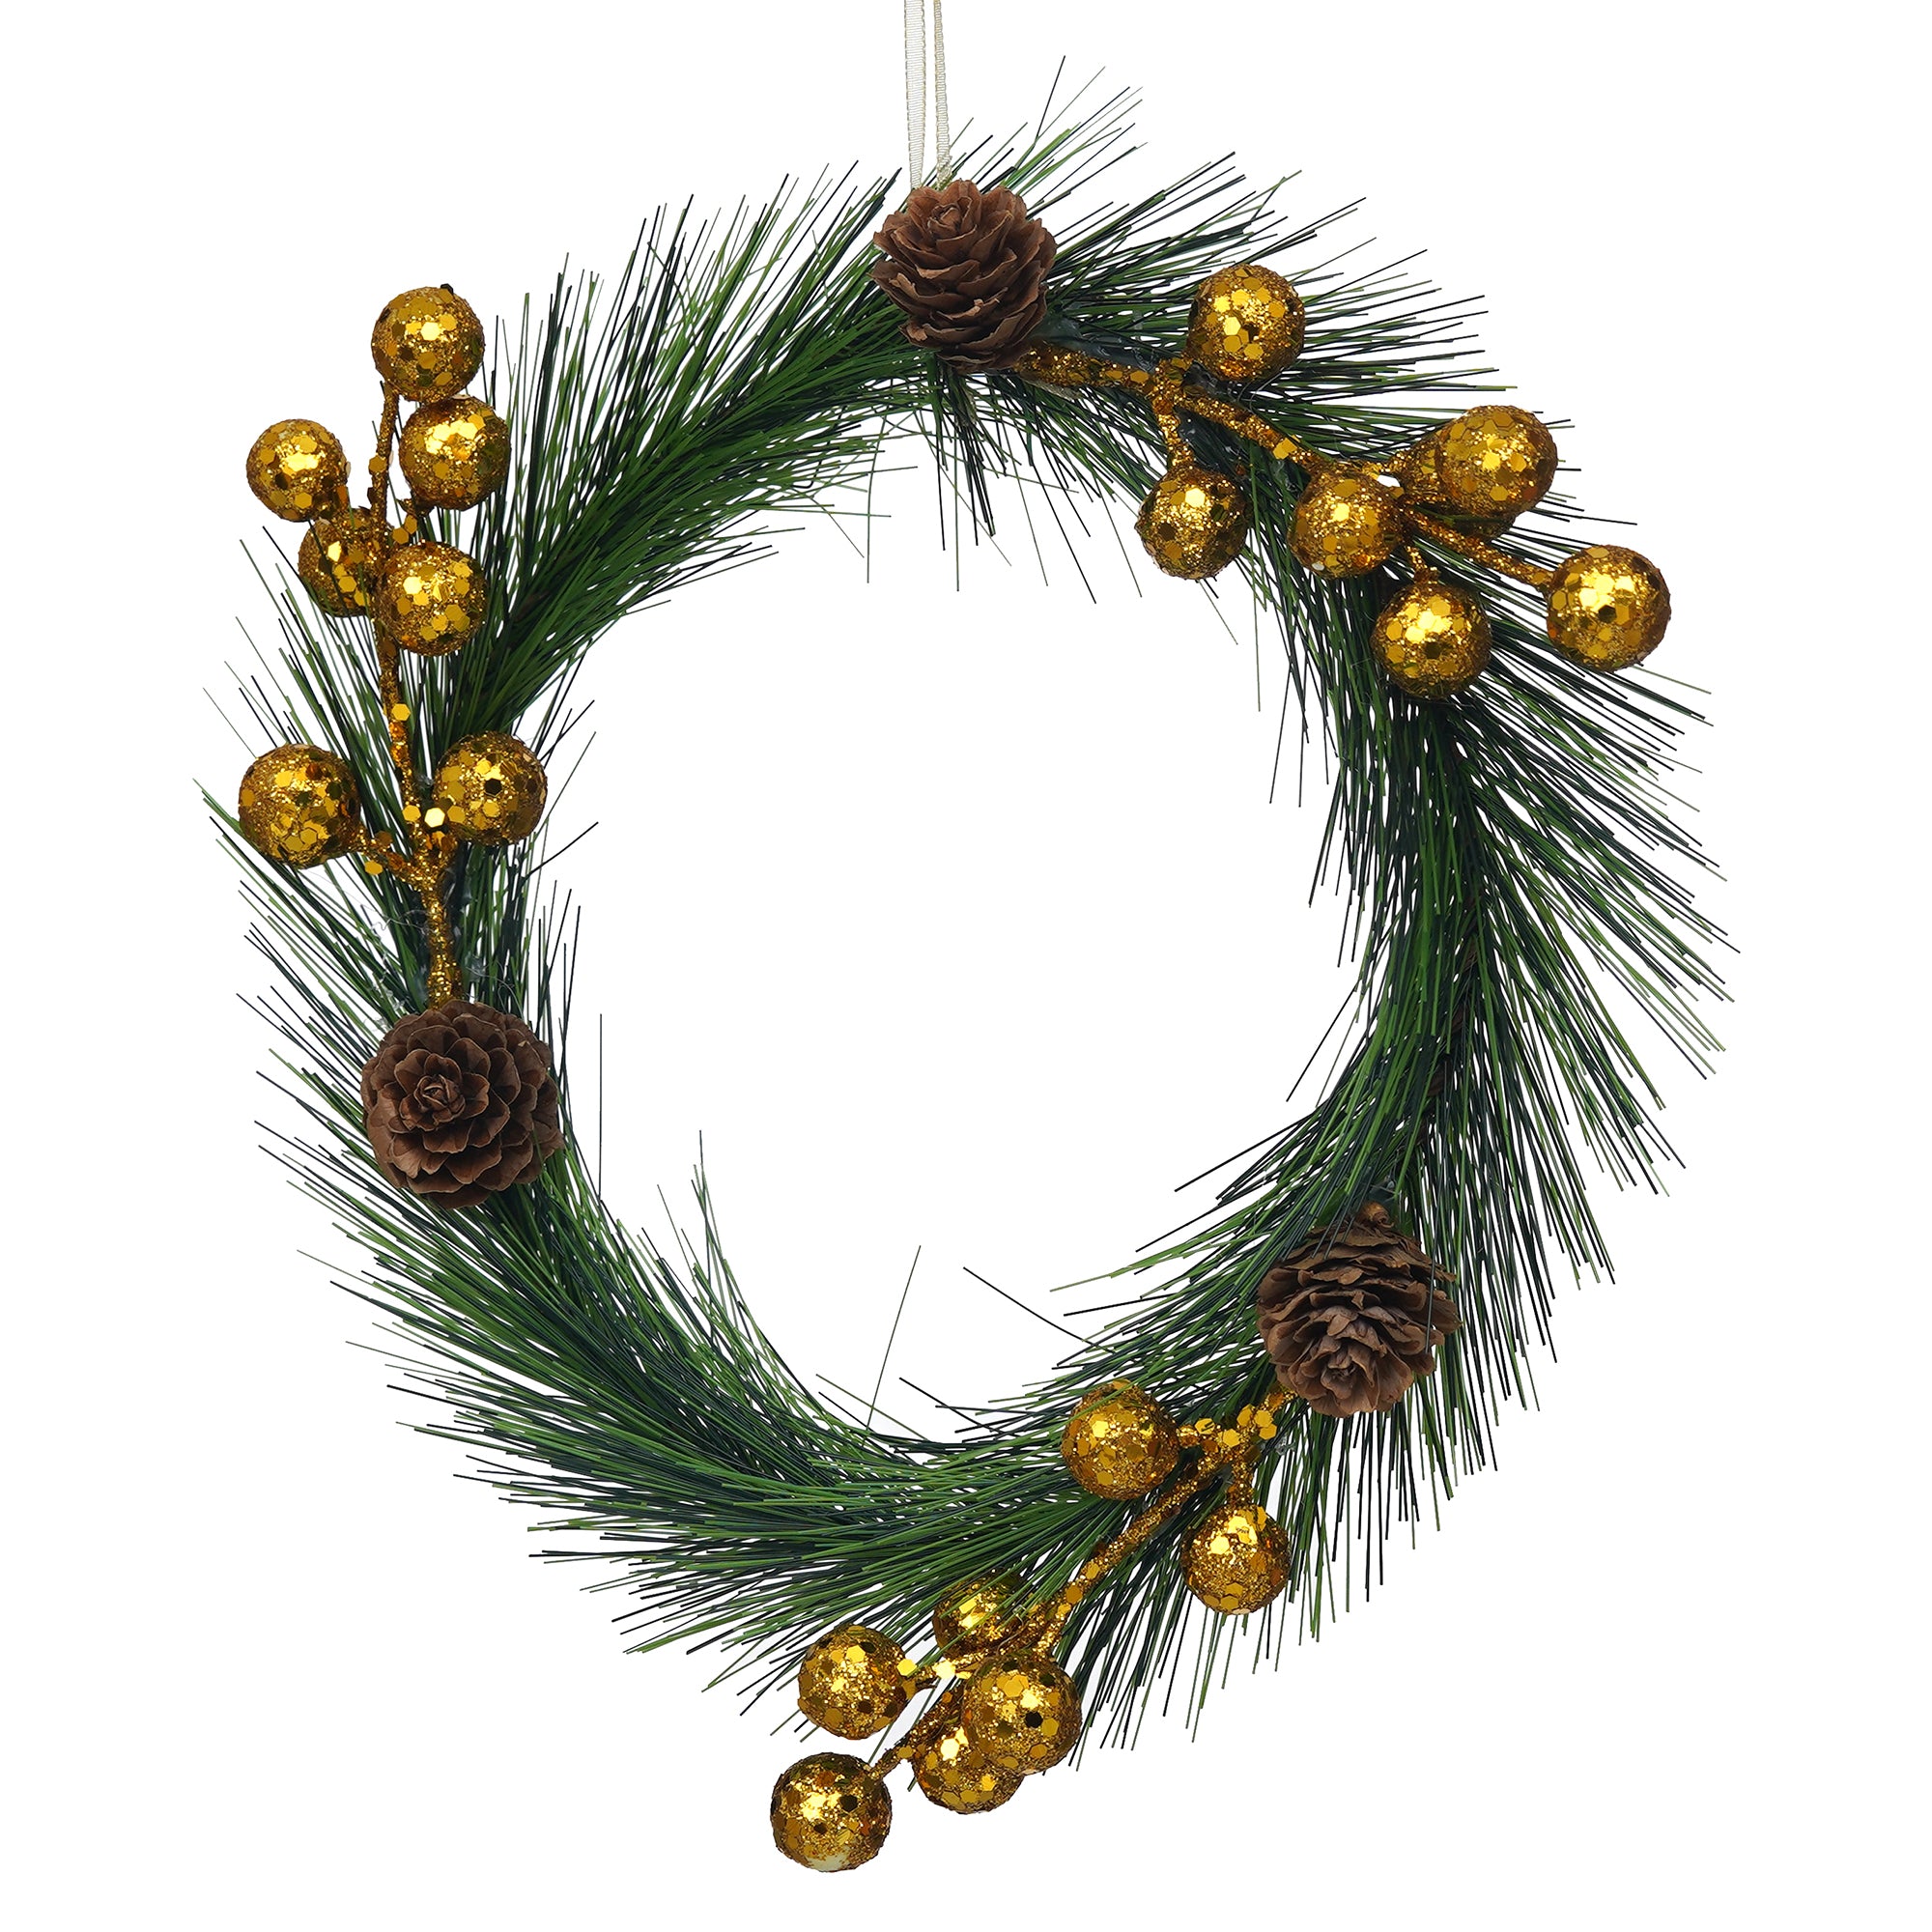 eCraftIndia Green Christmas Wreath with Gold Balls and Flowers Decorative Ornaments 7